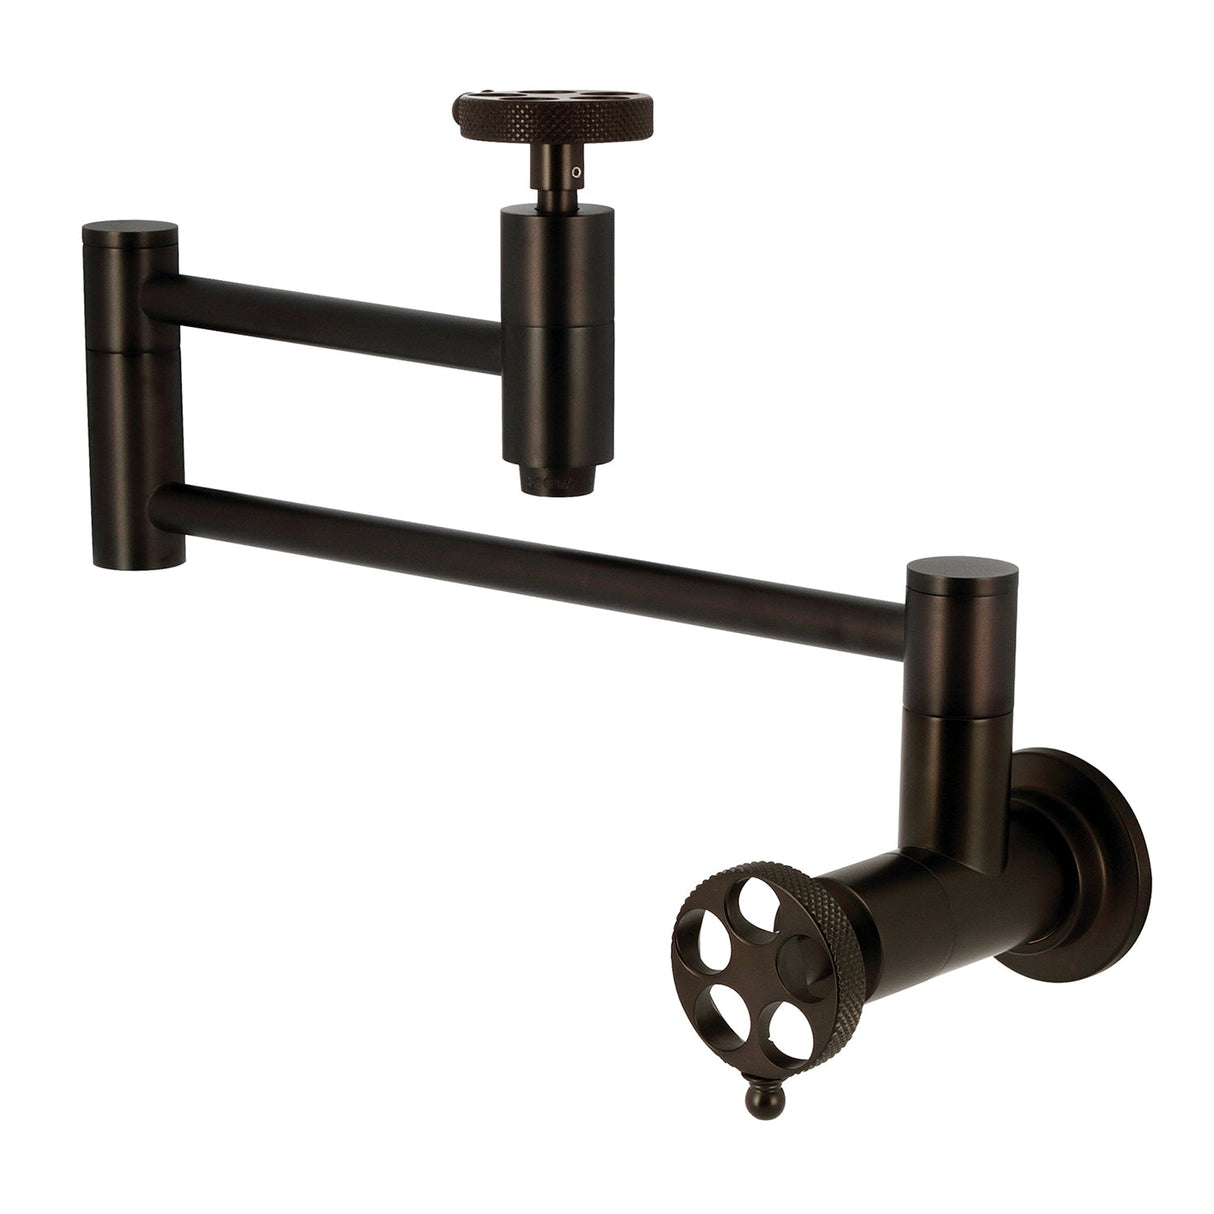 Webb KS8105RKX Two-Handle 1-Hole Wall Mount Pot Filler with Knurled Handle, Oil Rubbed Bronze